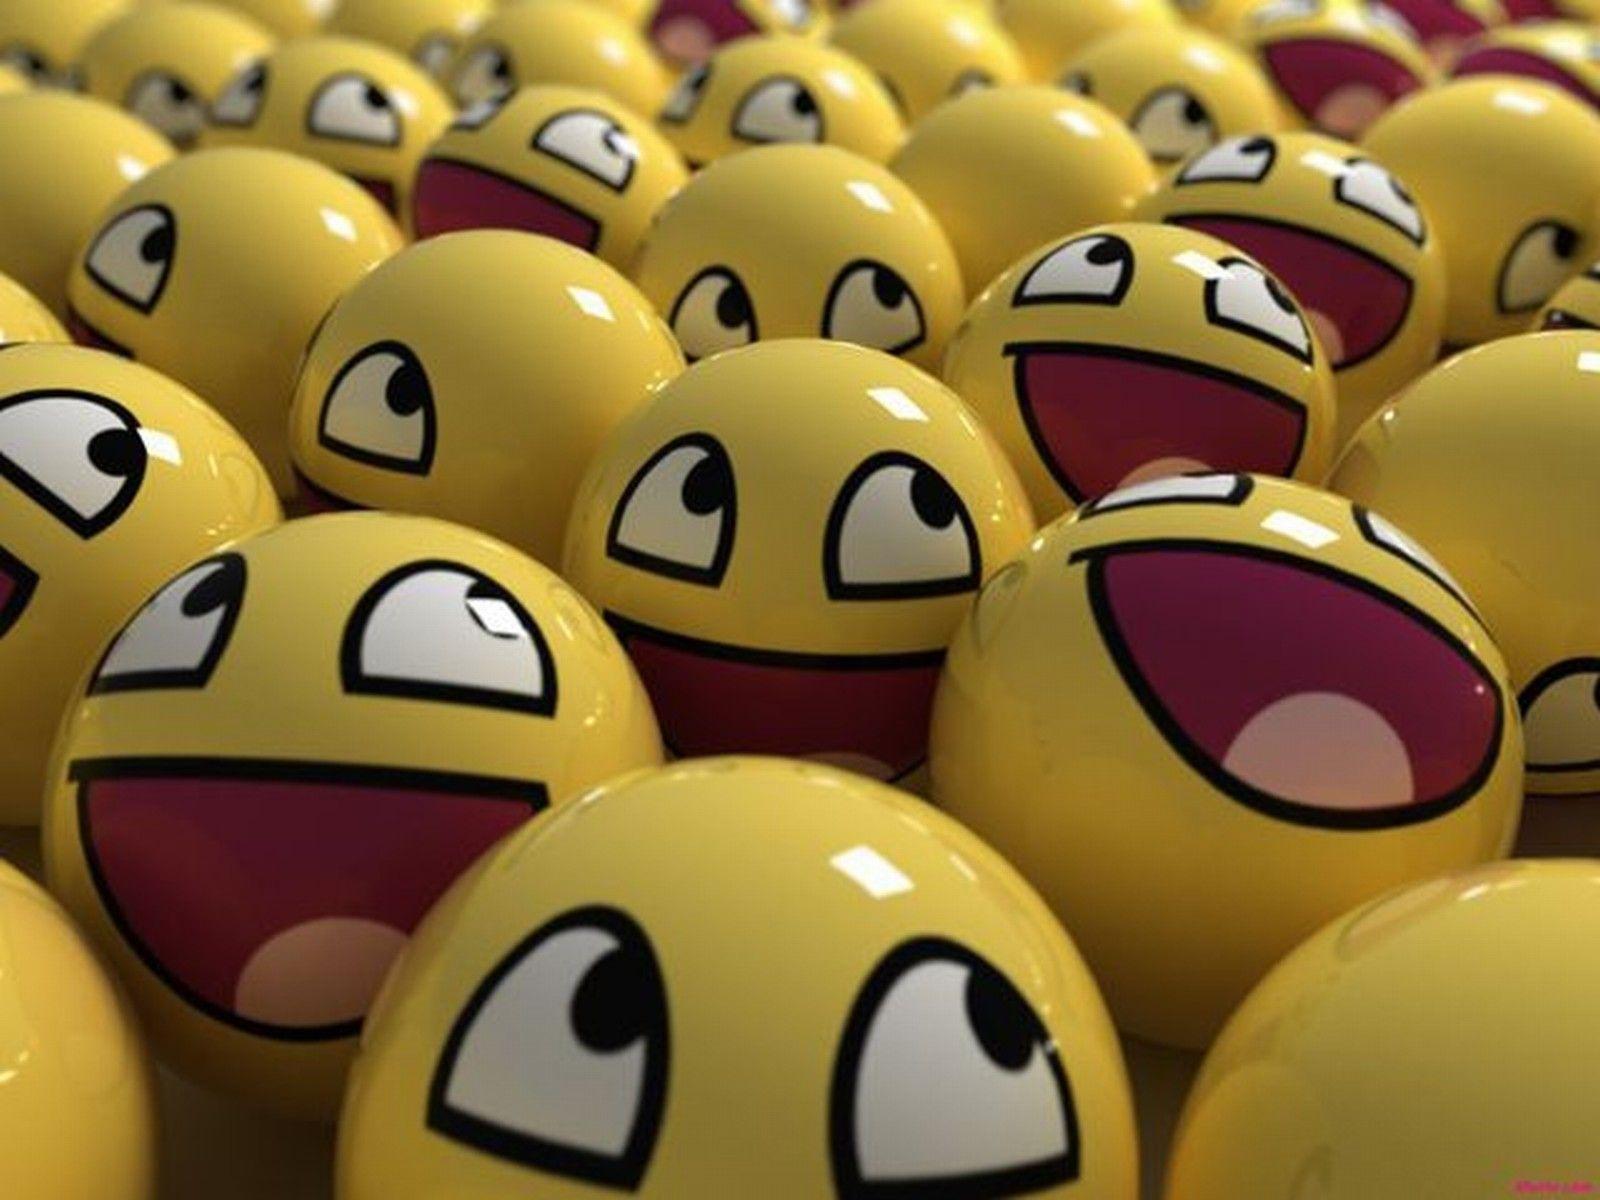 Cool Smiley Face Backgrounds - Wallpaper Cave